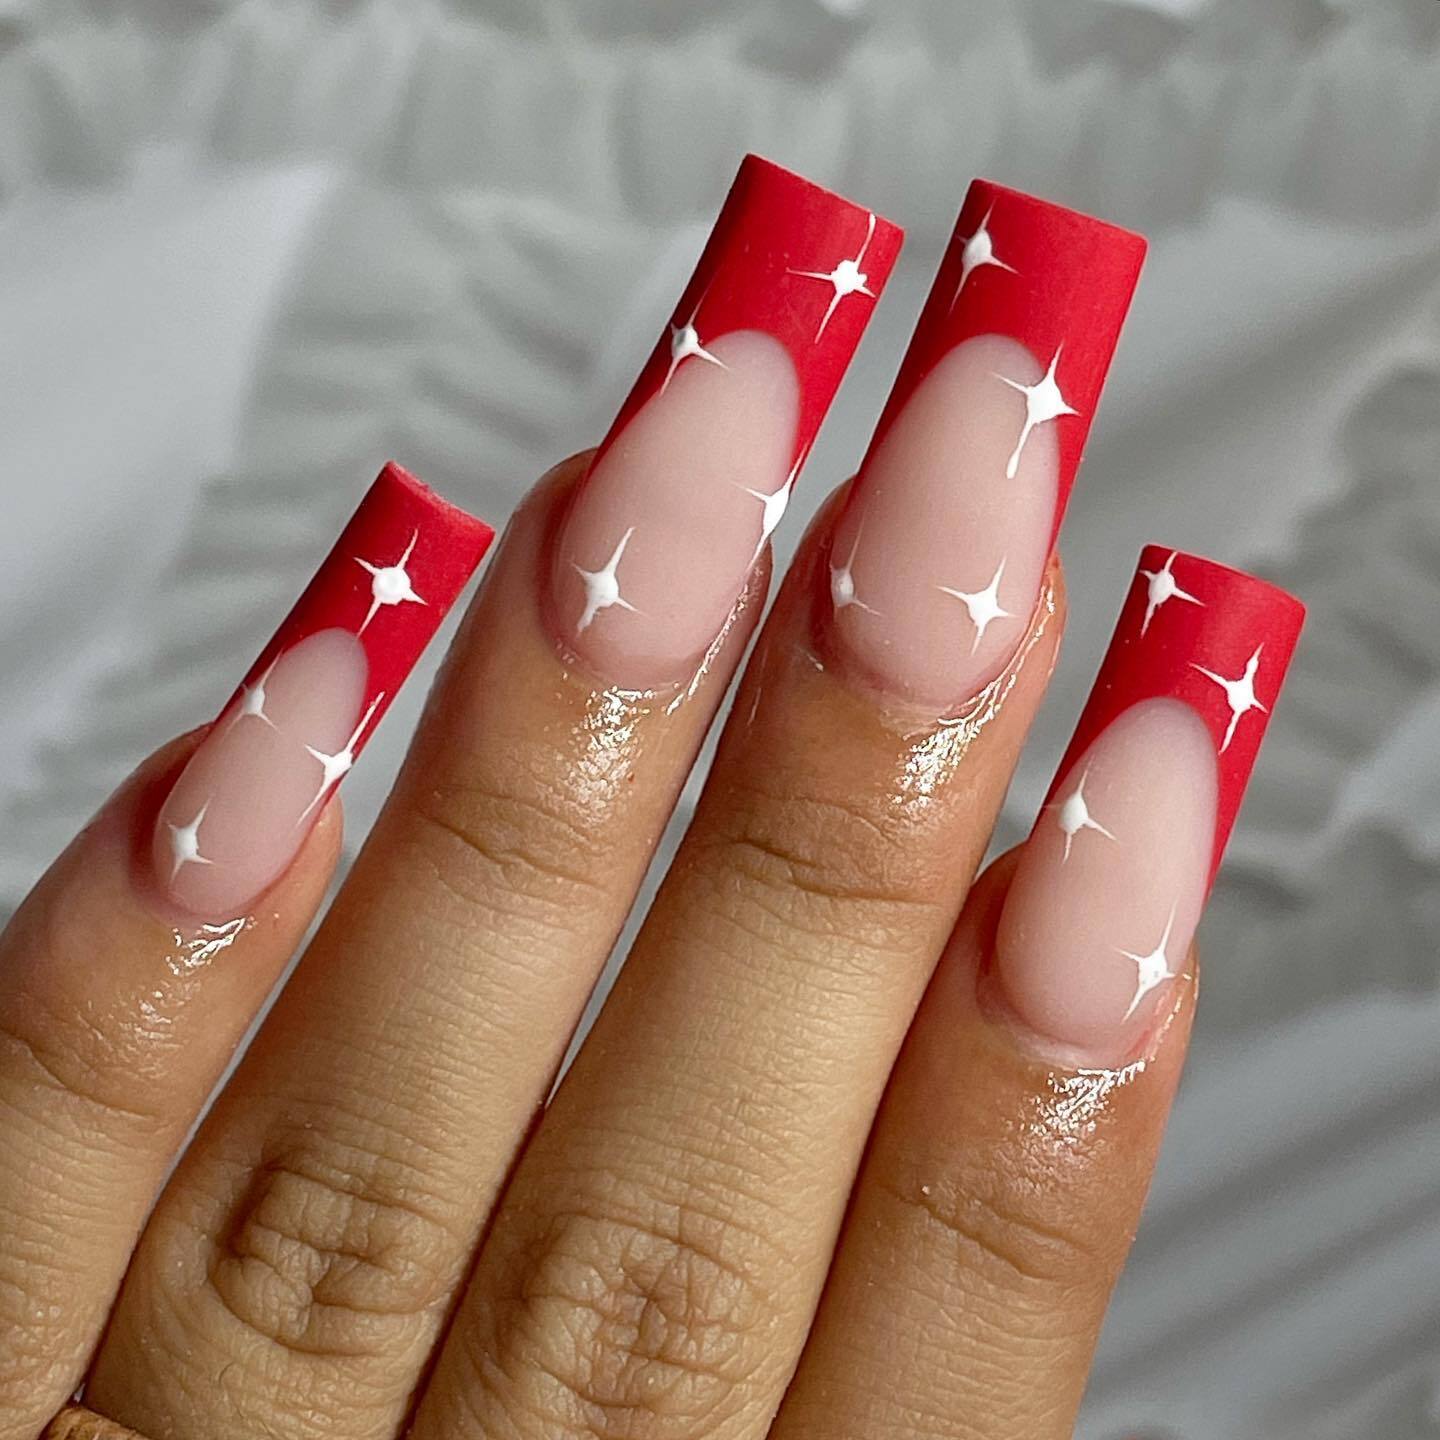 Square Red French Manicure With White Sparkles